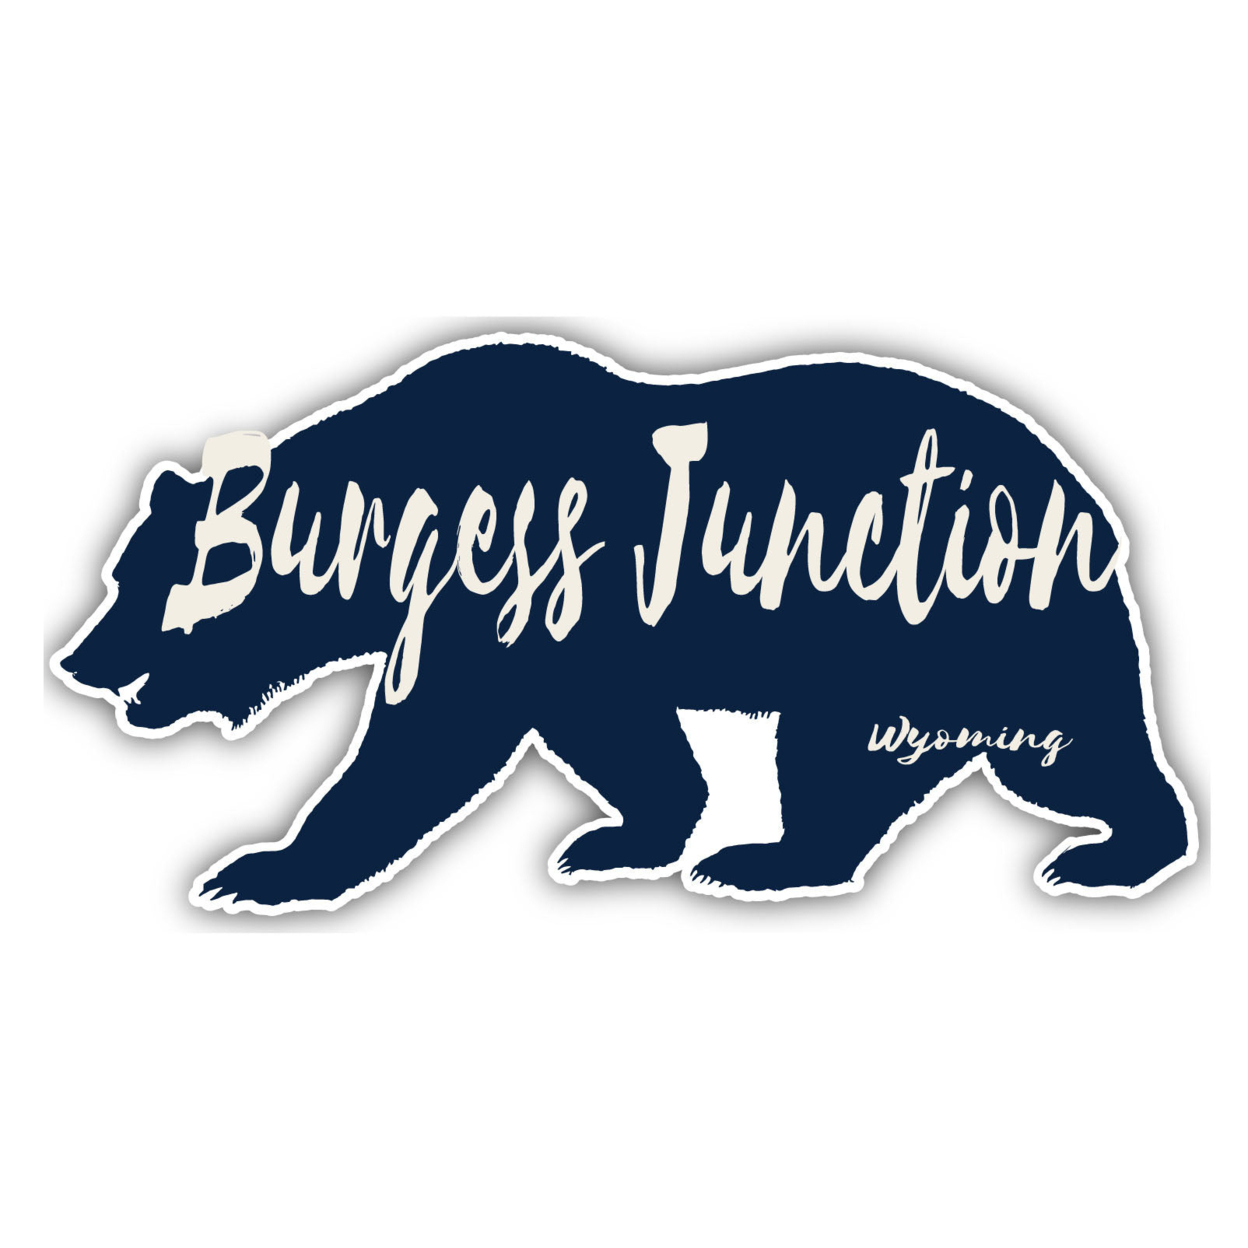 Burgess Junction Wyoming Souvenir Decorative Stickers (Choose Theme And Size) - Single Unit, 8-Inch, Adventures Awaits